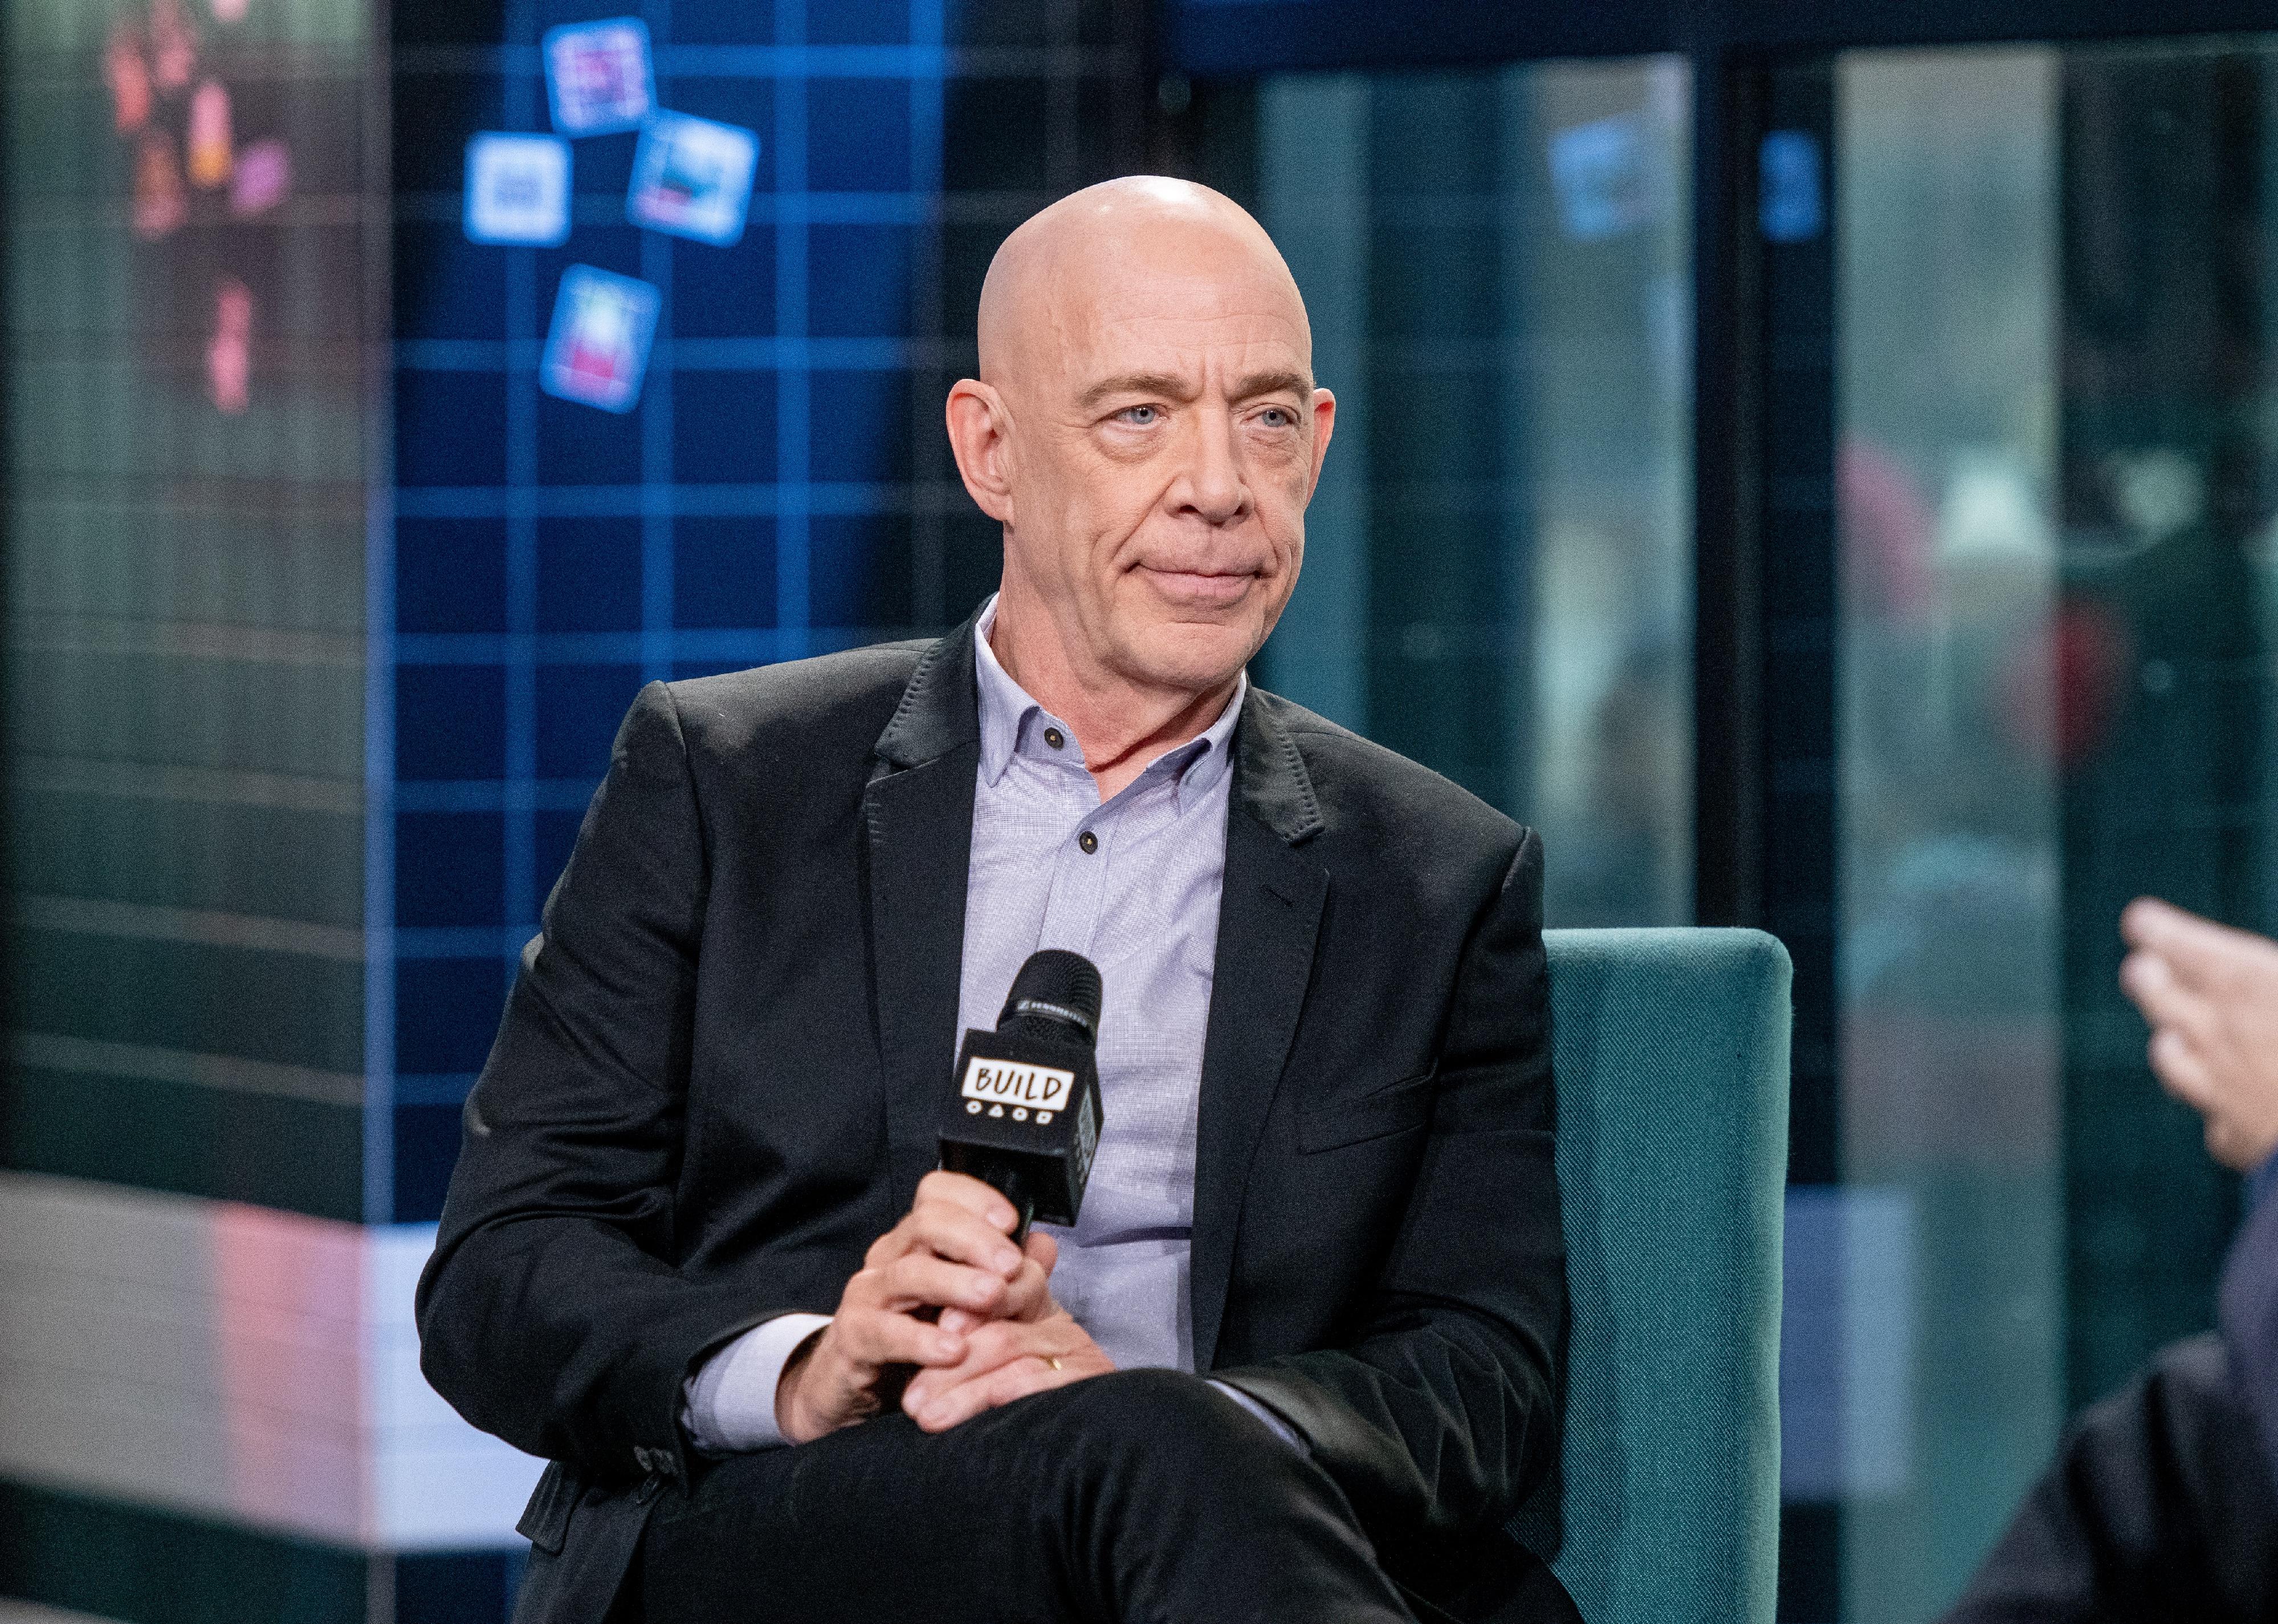 J.K. Simmons in a black jacket holding a microphone onstage.